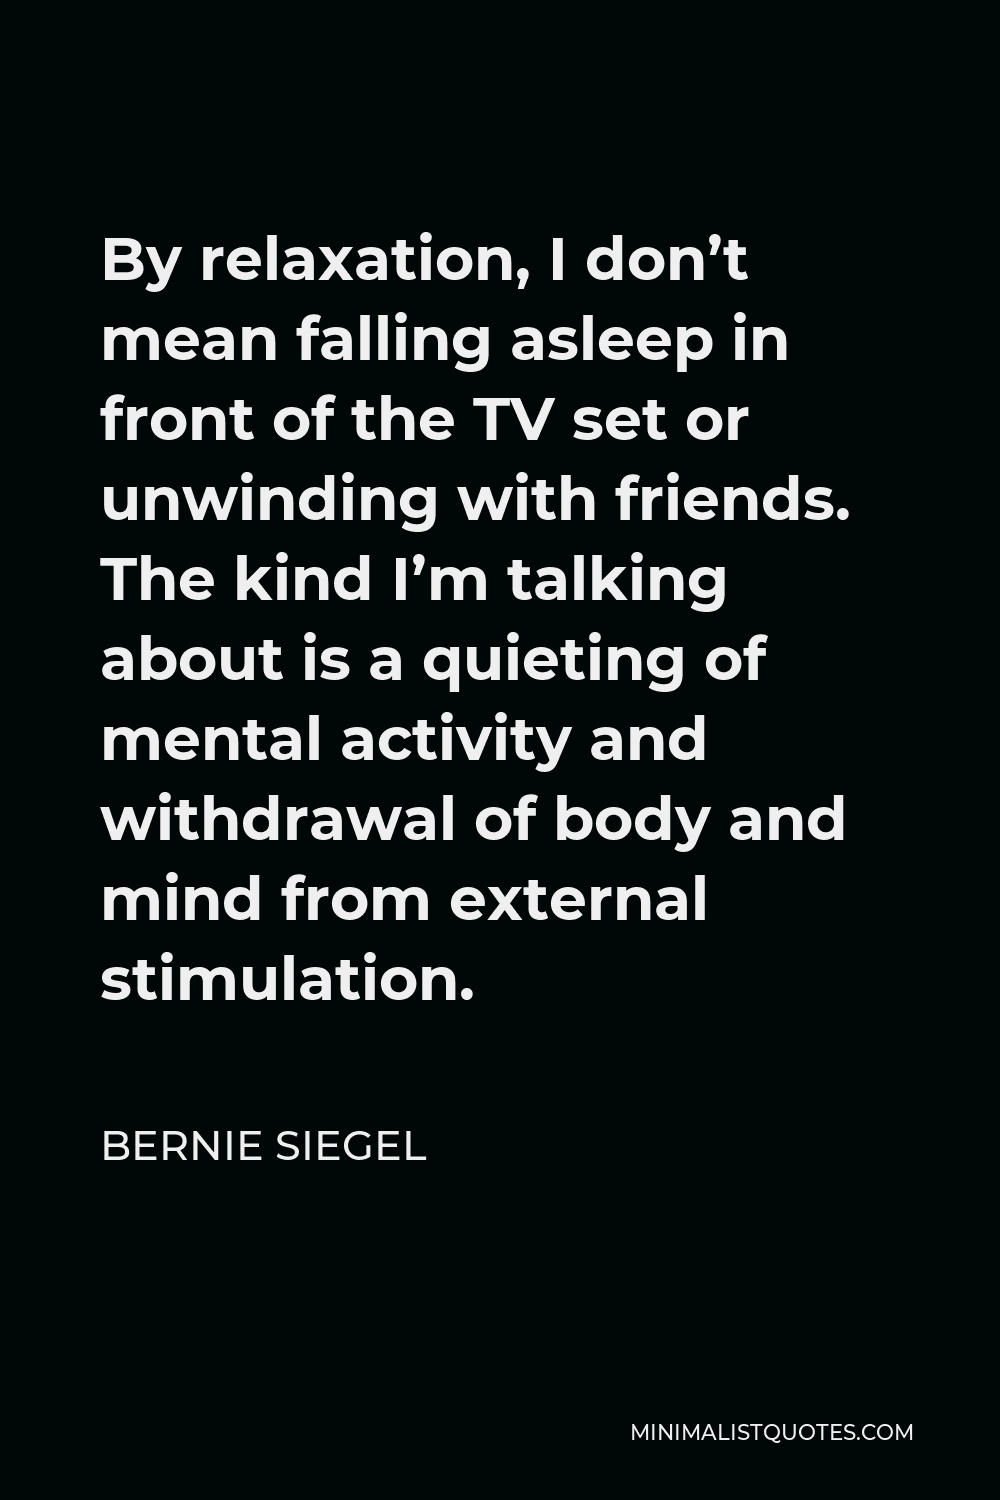 Bernie Siegel Quote - By relaxation, I don’t mean falling asleep in front of the TV set or unwinding with friends. The kind I’m talking about is a quieting of mental activity and withdrawal of body and mind from external stimulation.